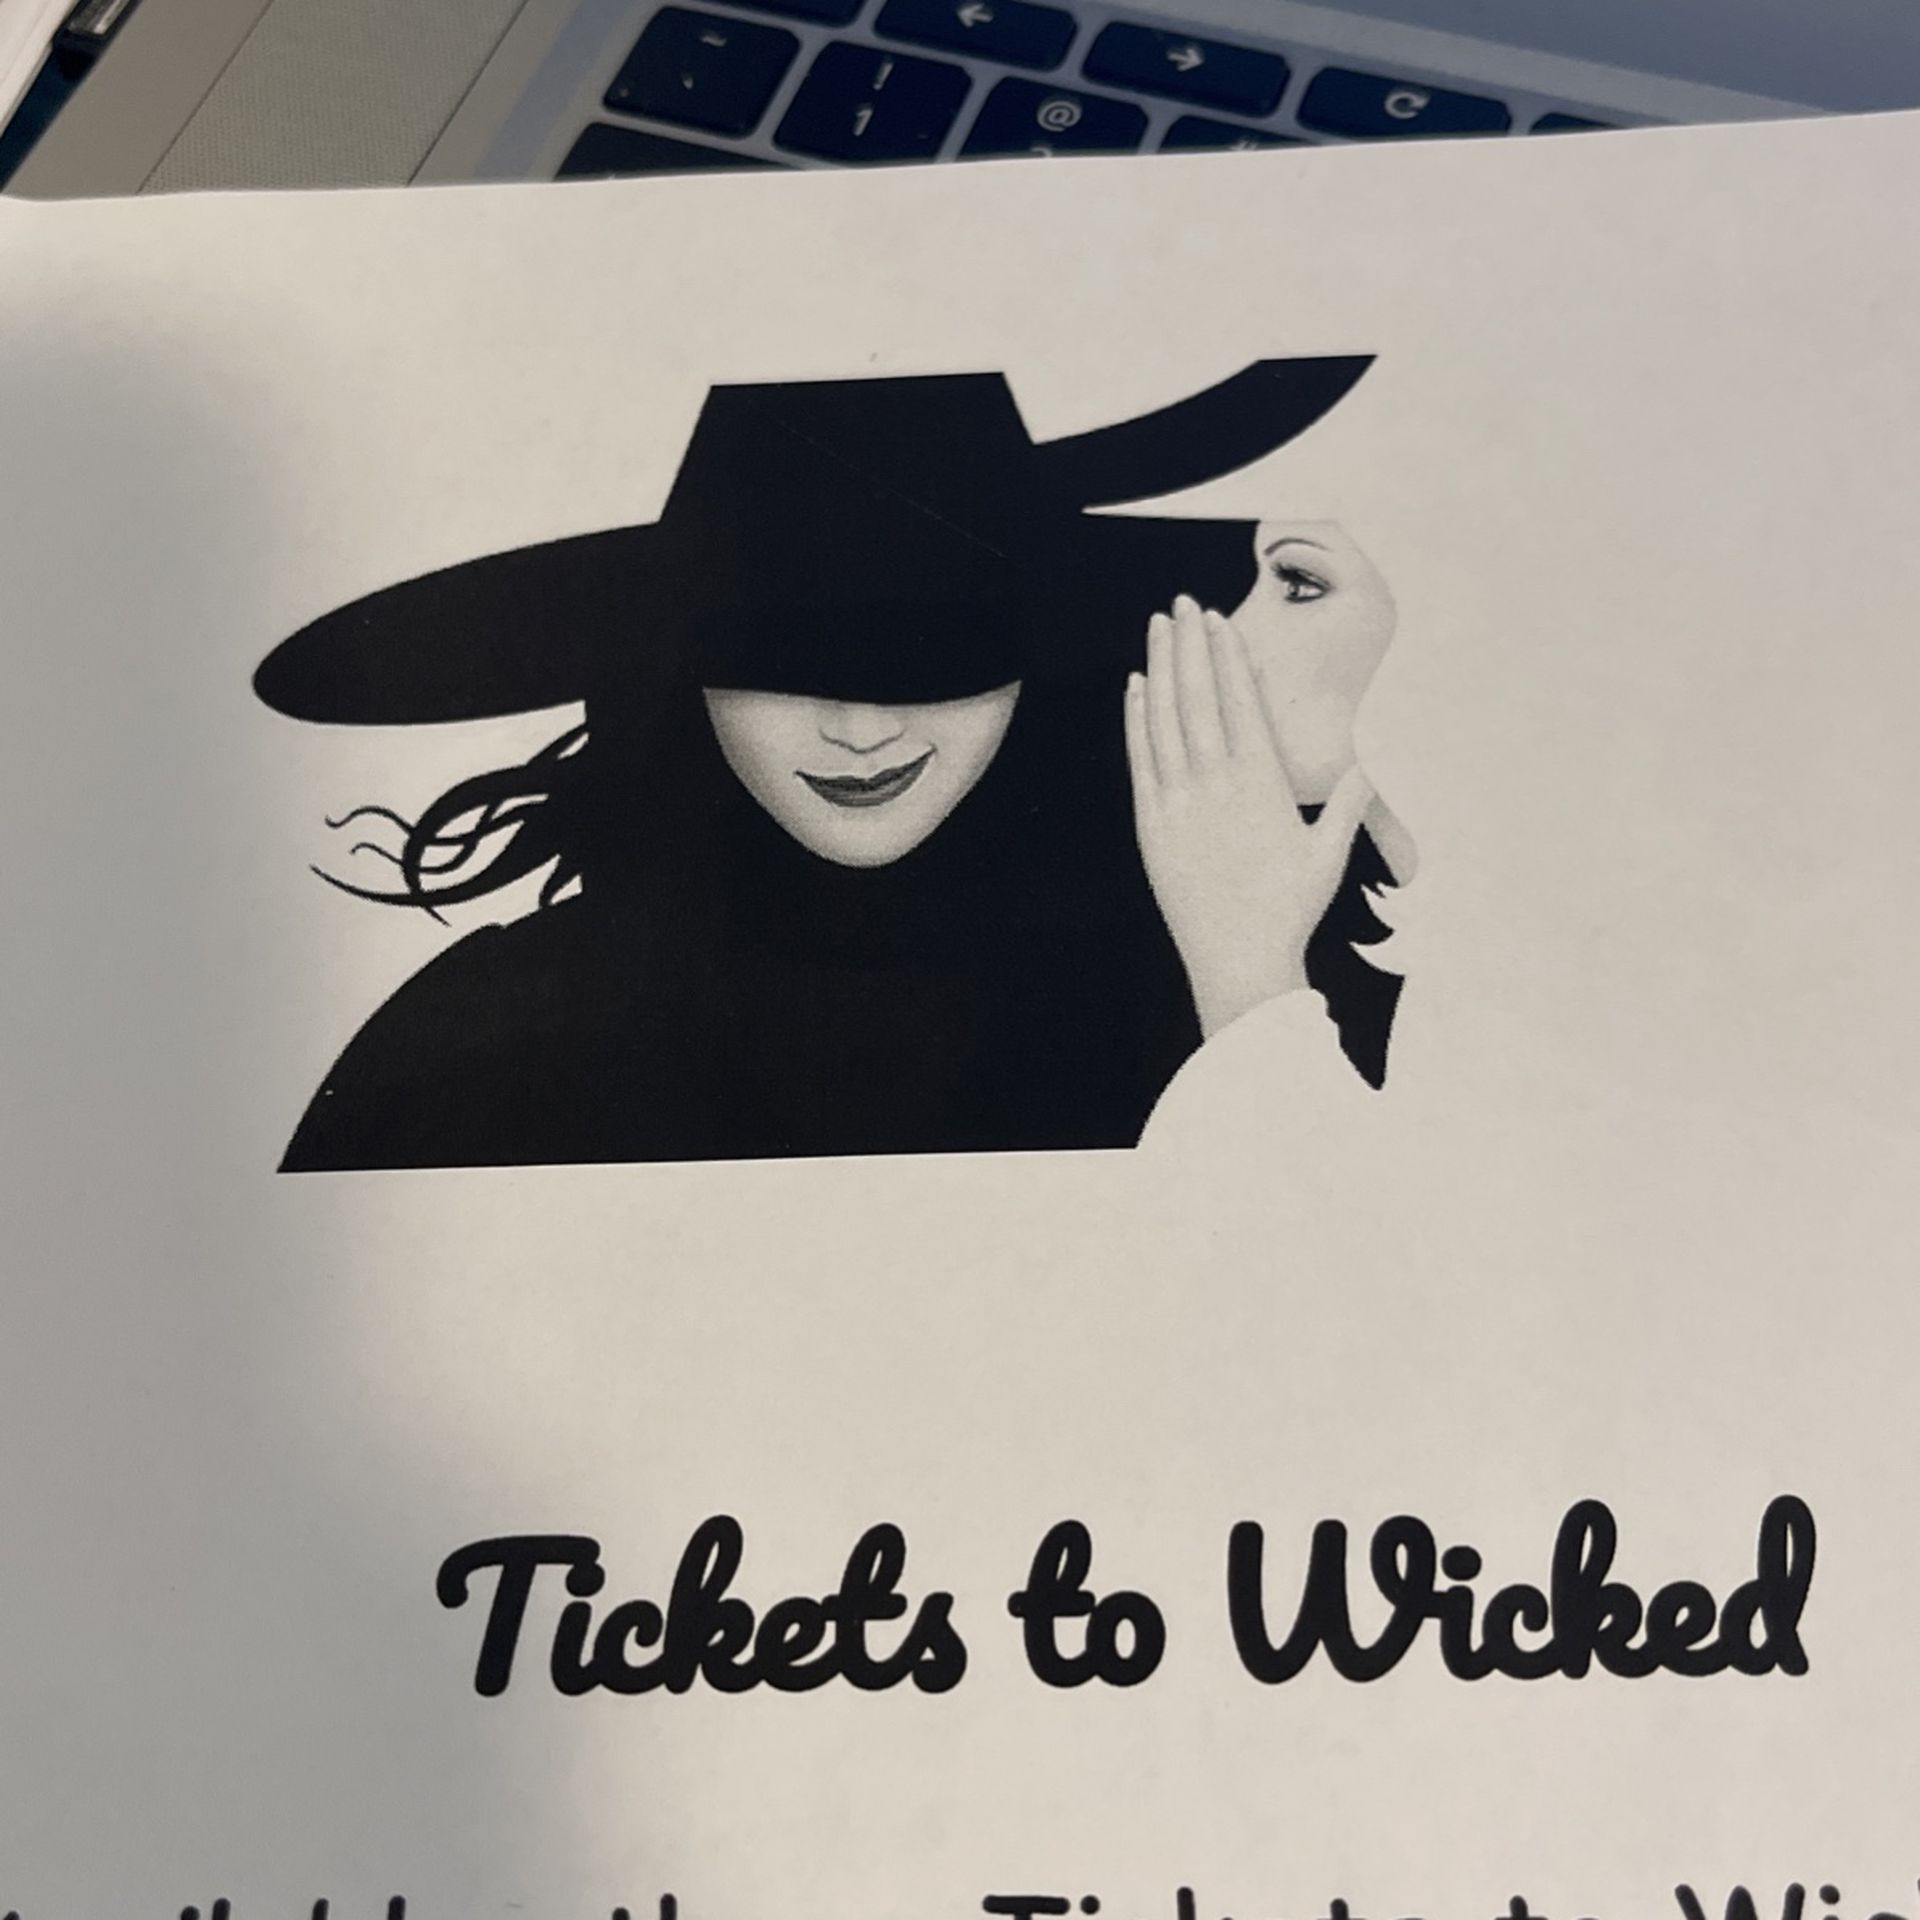 Tickets To Wicked